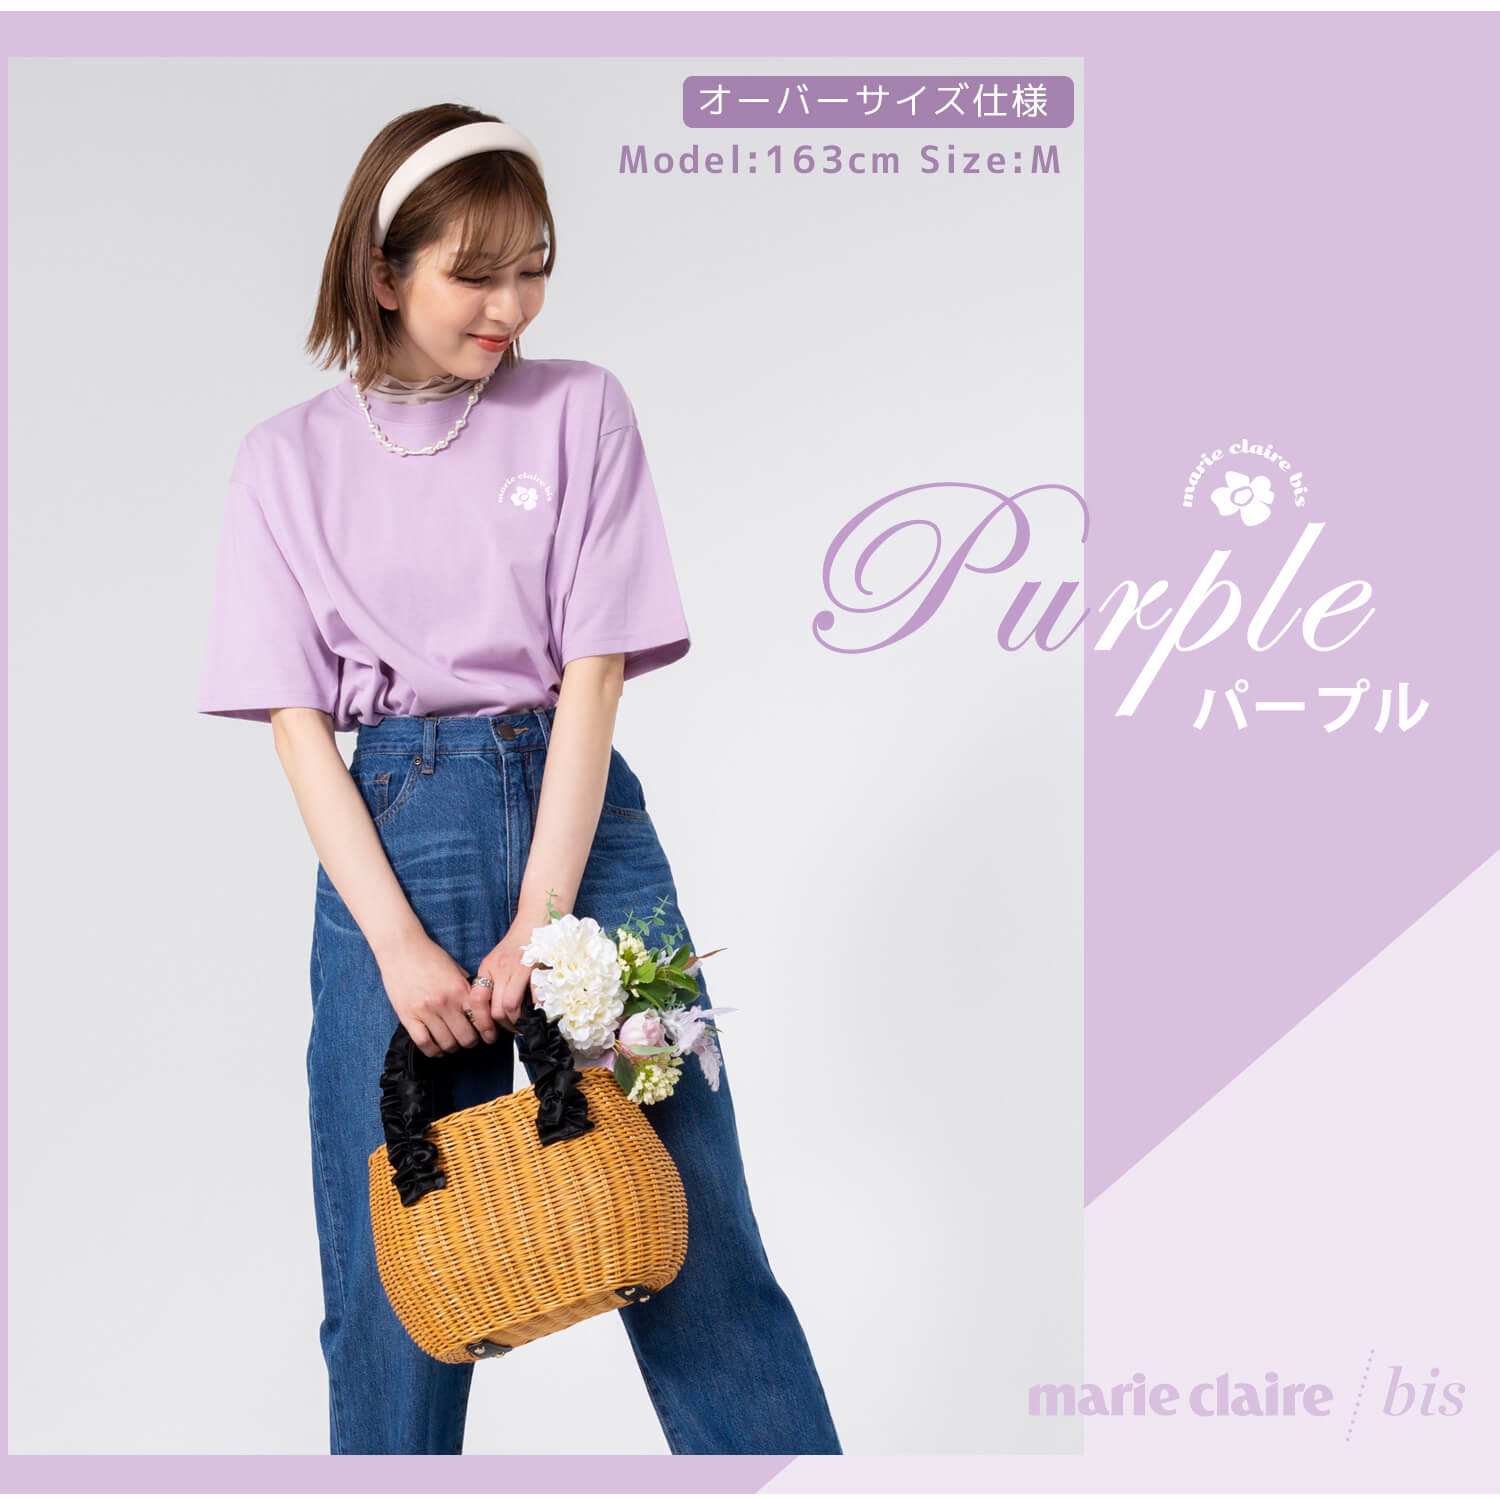 marie claire bis マリクレール ビス Tシャツ レディース 半袖 綿 汗染み防止 脇...